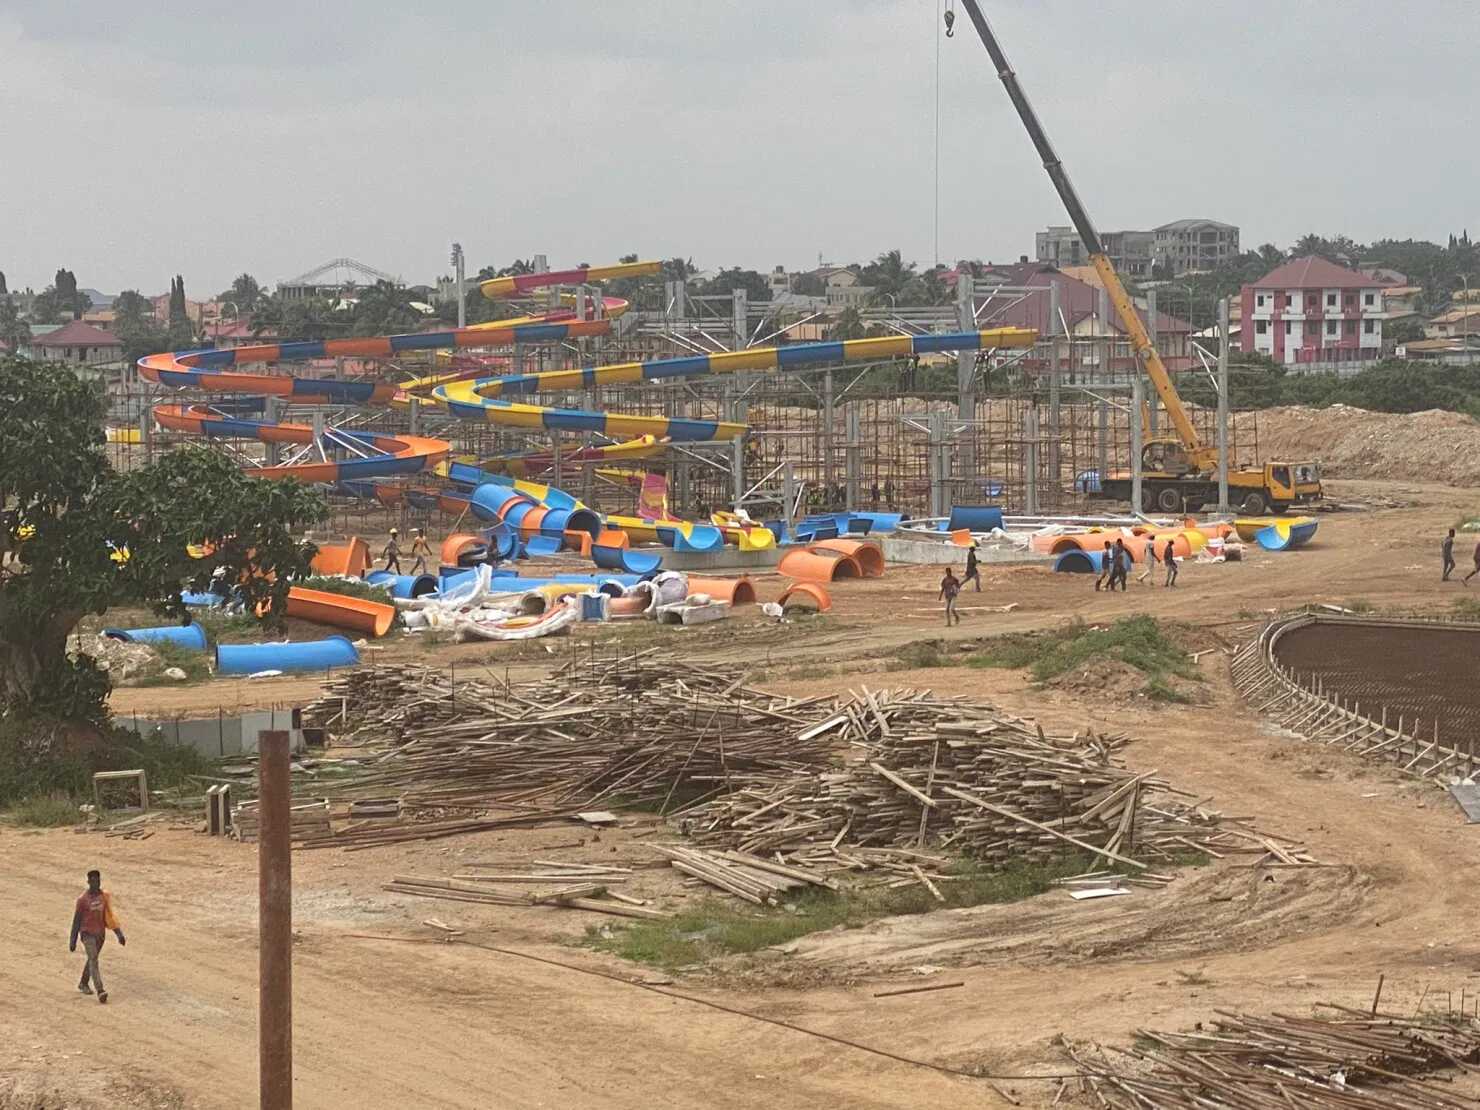 Public Figures Excited About Ghana Almost Experiencing A New Water Park